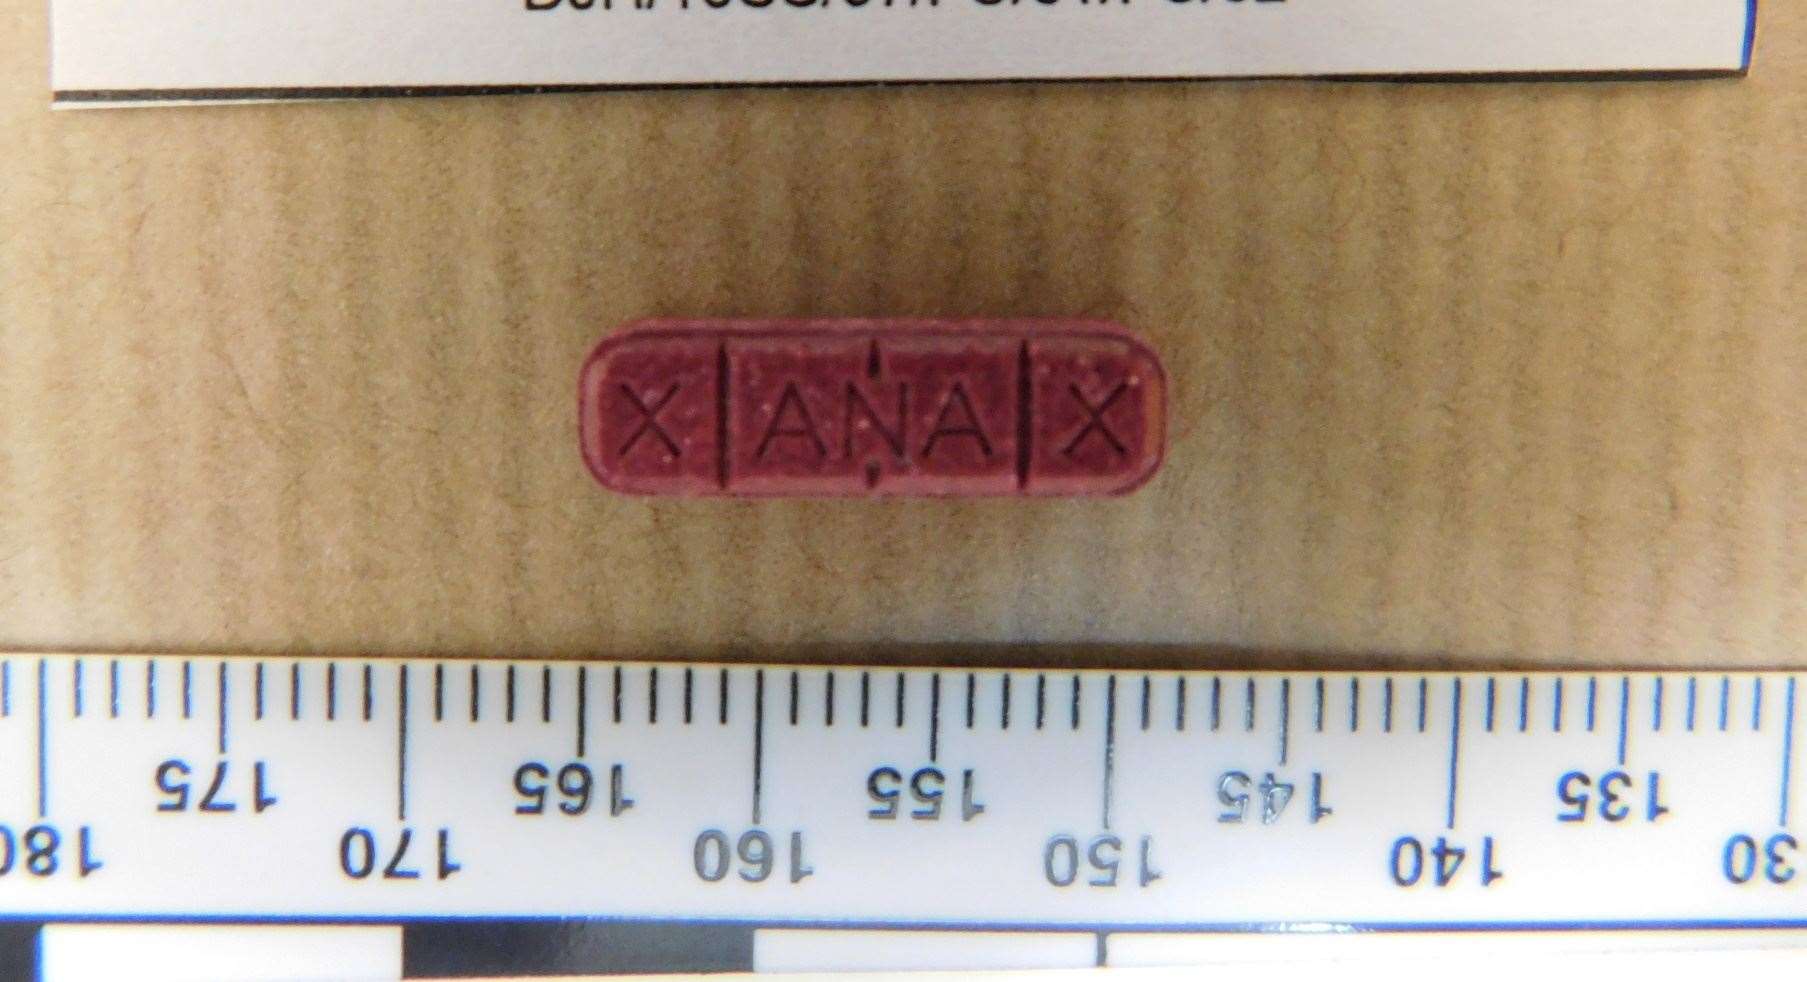 The gang sold Xanax and other drugs from their lab. Picture: SWNS